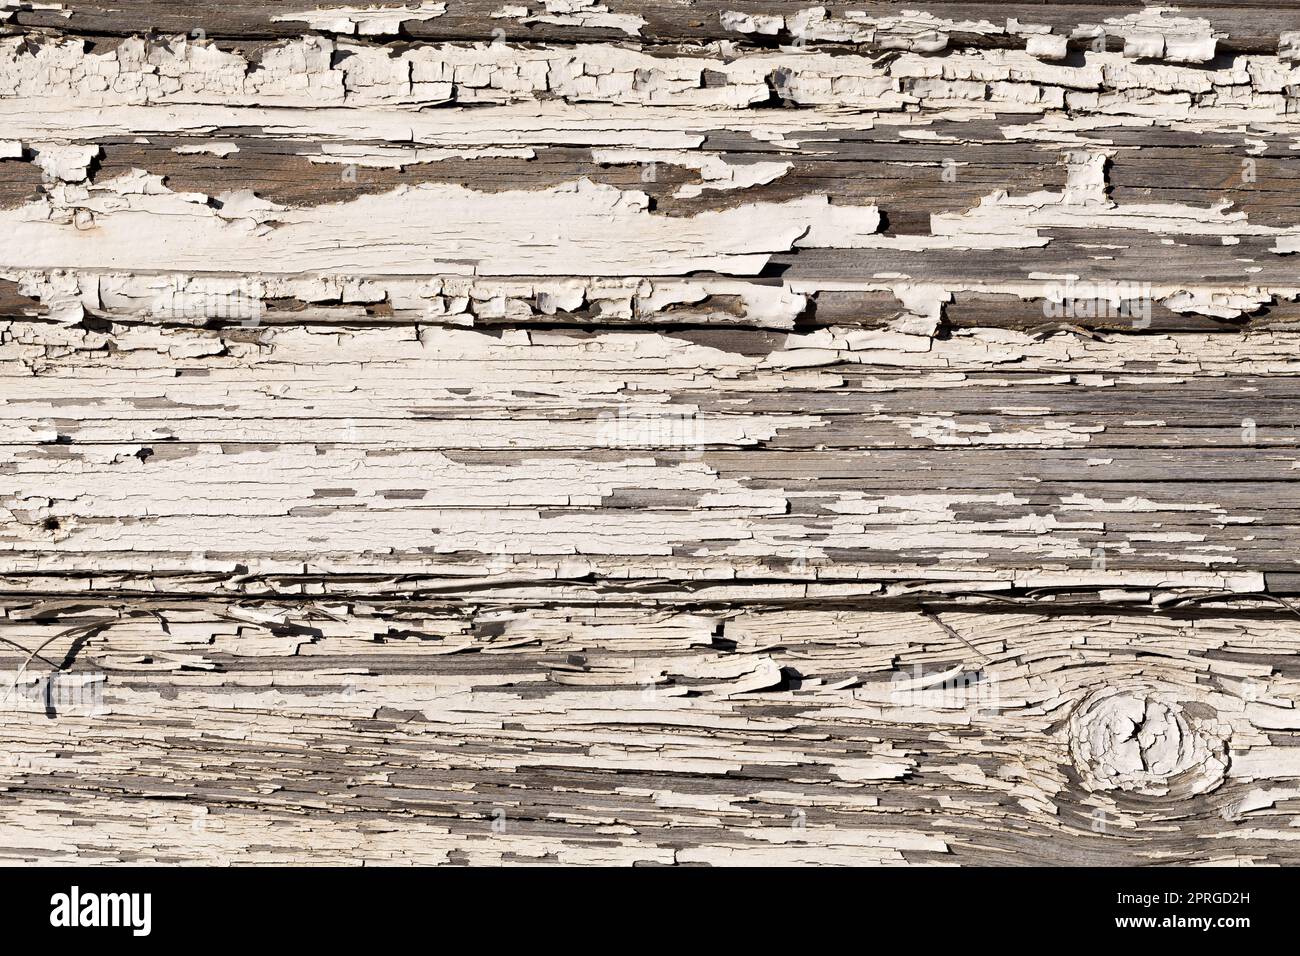 Wooden wall with white paint Stock Photo